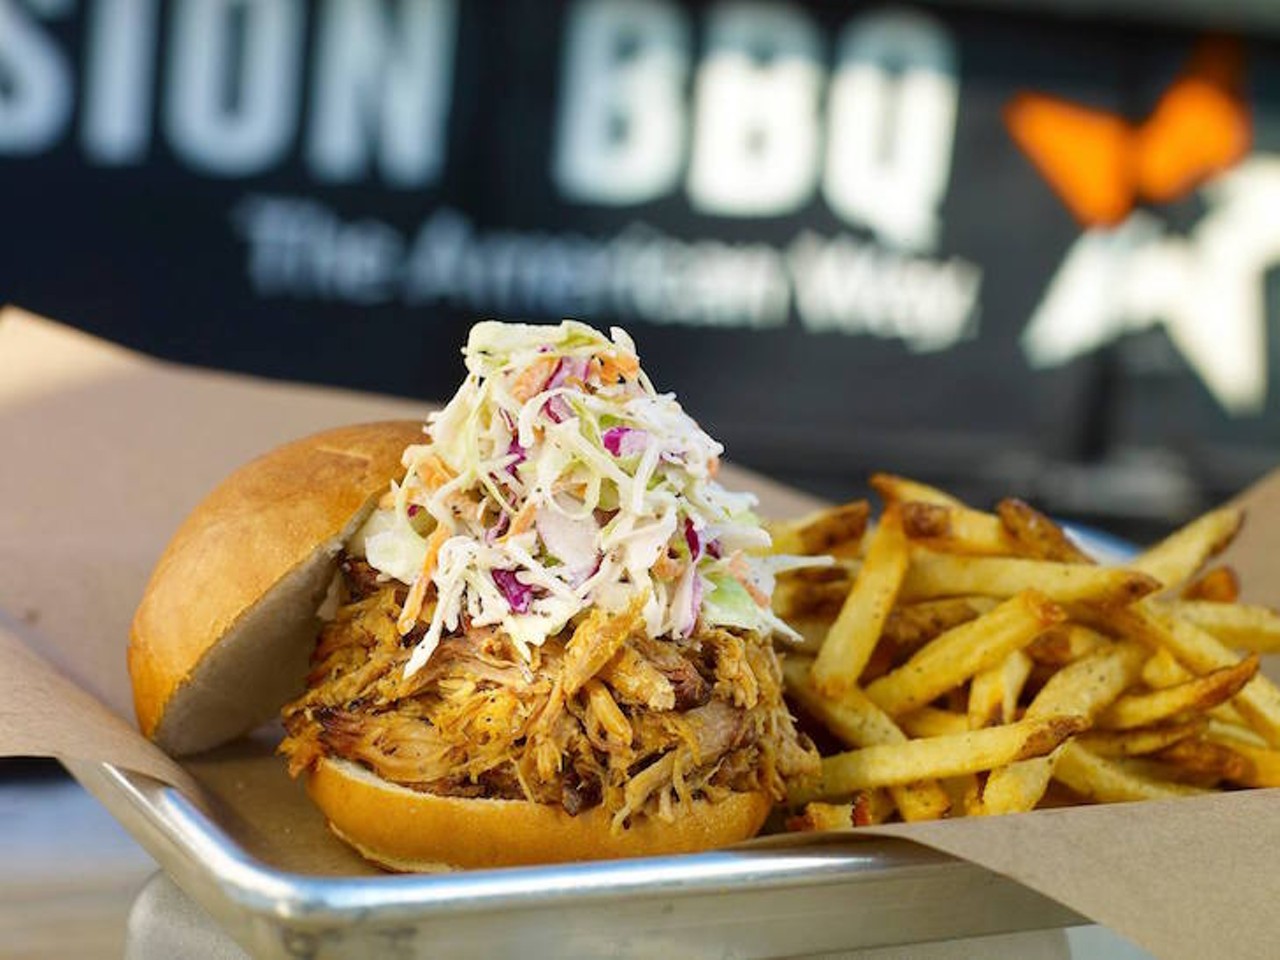 Must  try: Go all out with a slow smoked, hand pulled pork sandwich combo covered  with the BBQ chain&#146;s &#147;cold slaw&#148; topping.  
Photo via Mission BBQ/Facebook